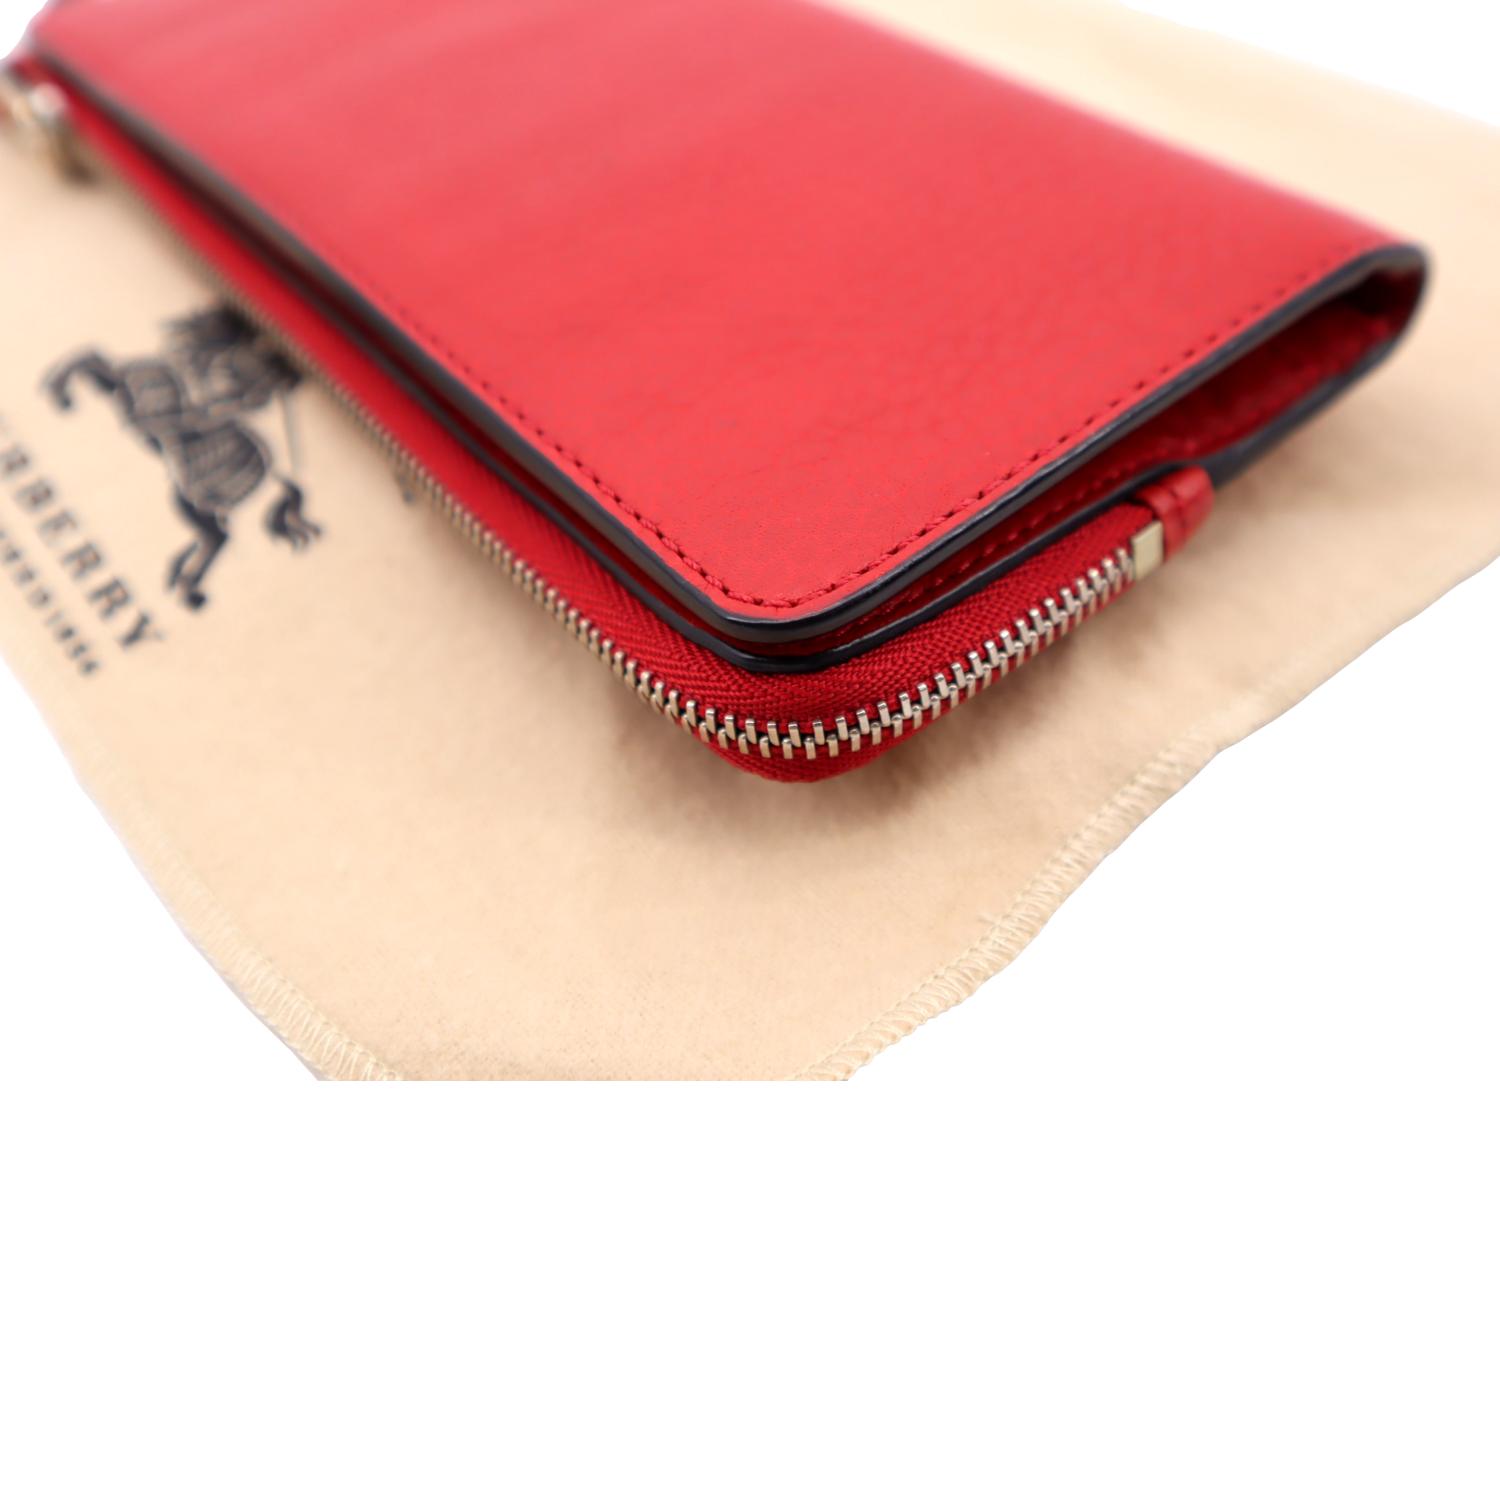 Burberry Red Leather Sidney Trifold Wallet Burberry